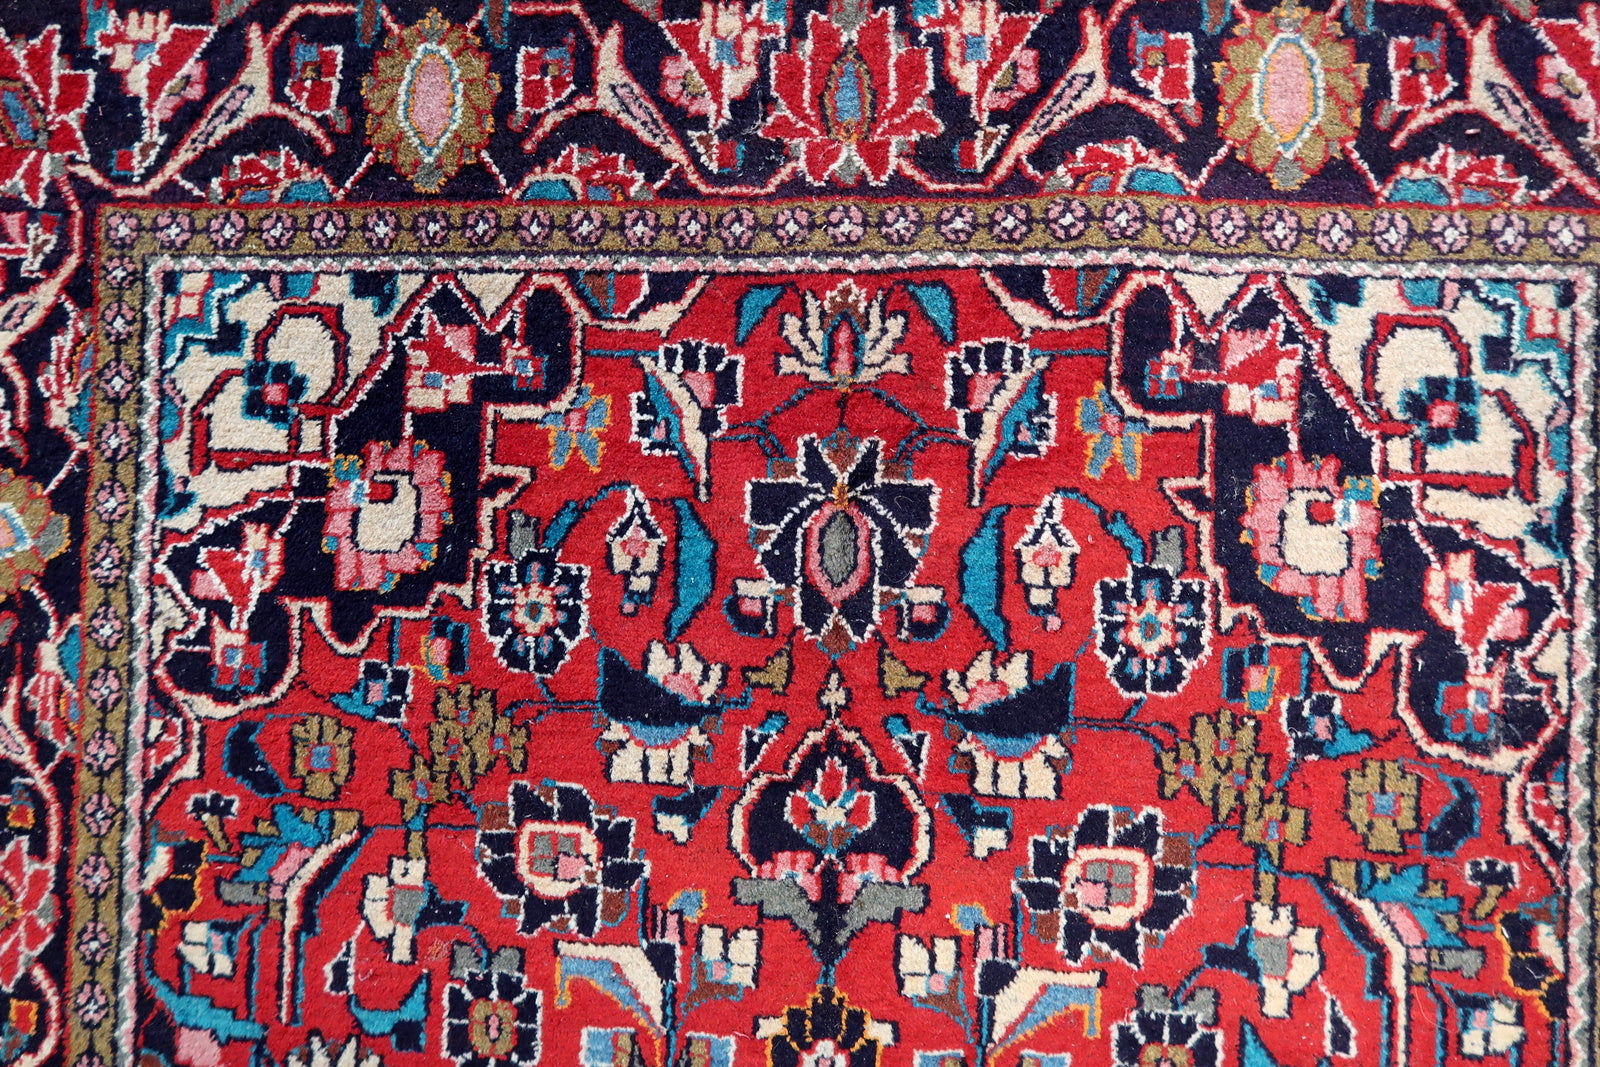 Close-up of the rug's corner, showcasing the intricate craftsmanship and knotting techniques